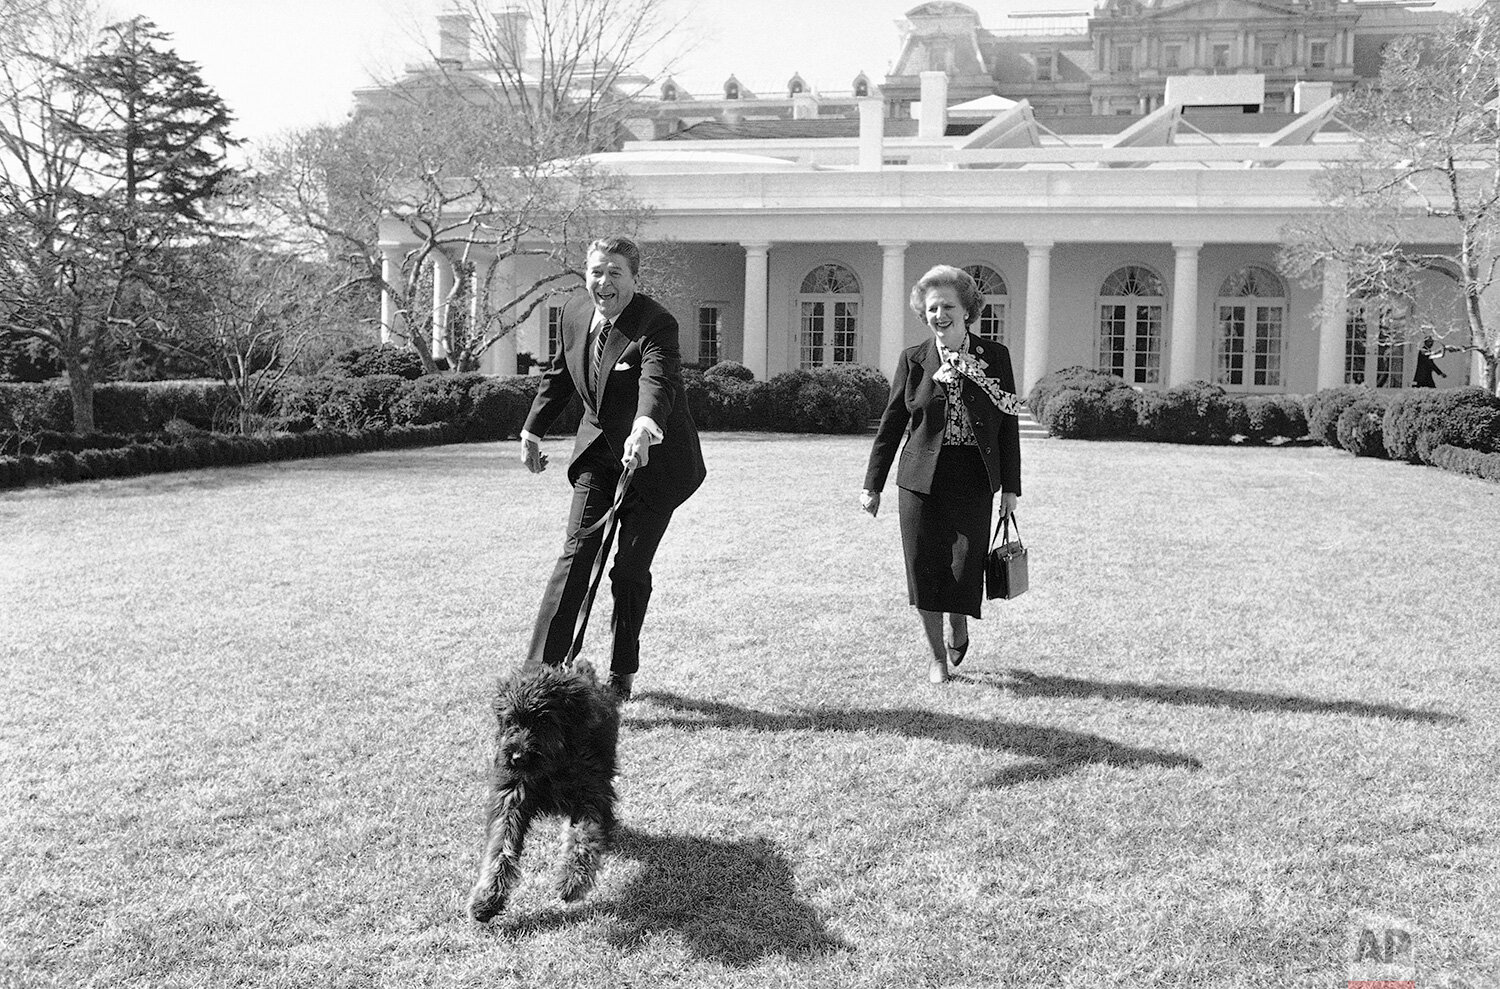  President Ronald Reagan is pulled along by his pet dog Lucky while he and British Prime Minister Margaret Thatcher take a stroll in the White House Rose Garden on Feb. 20, 1985. (AP Photo/Barry Thumma) 